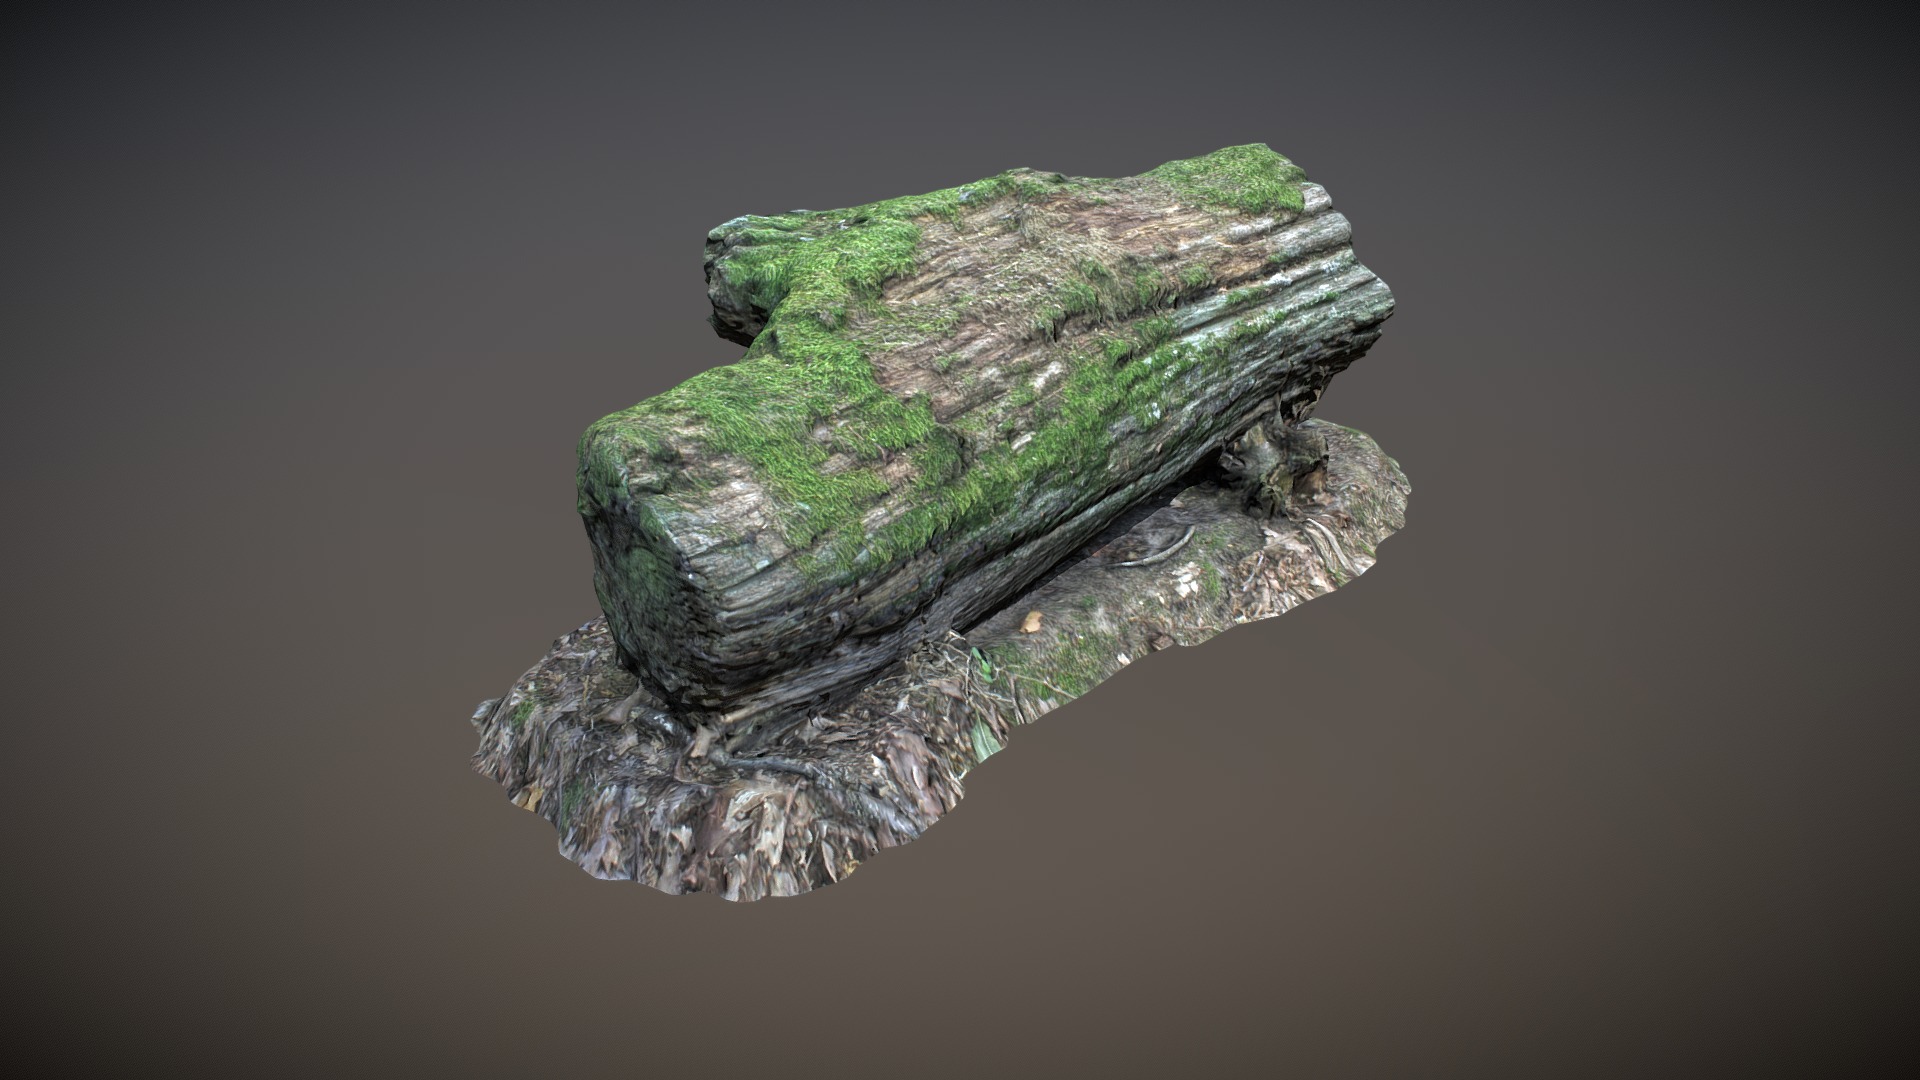 3D model Nature Forest Stuff 001 - This is a 3D model of the Nature Forest Stuff 001. The 3D model is about a green and white reptile.